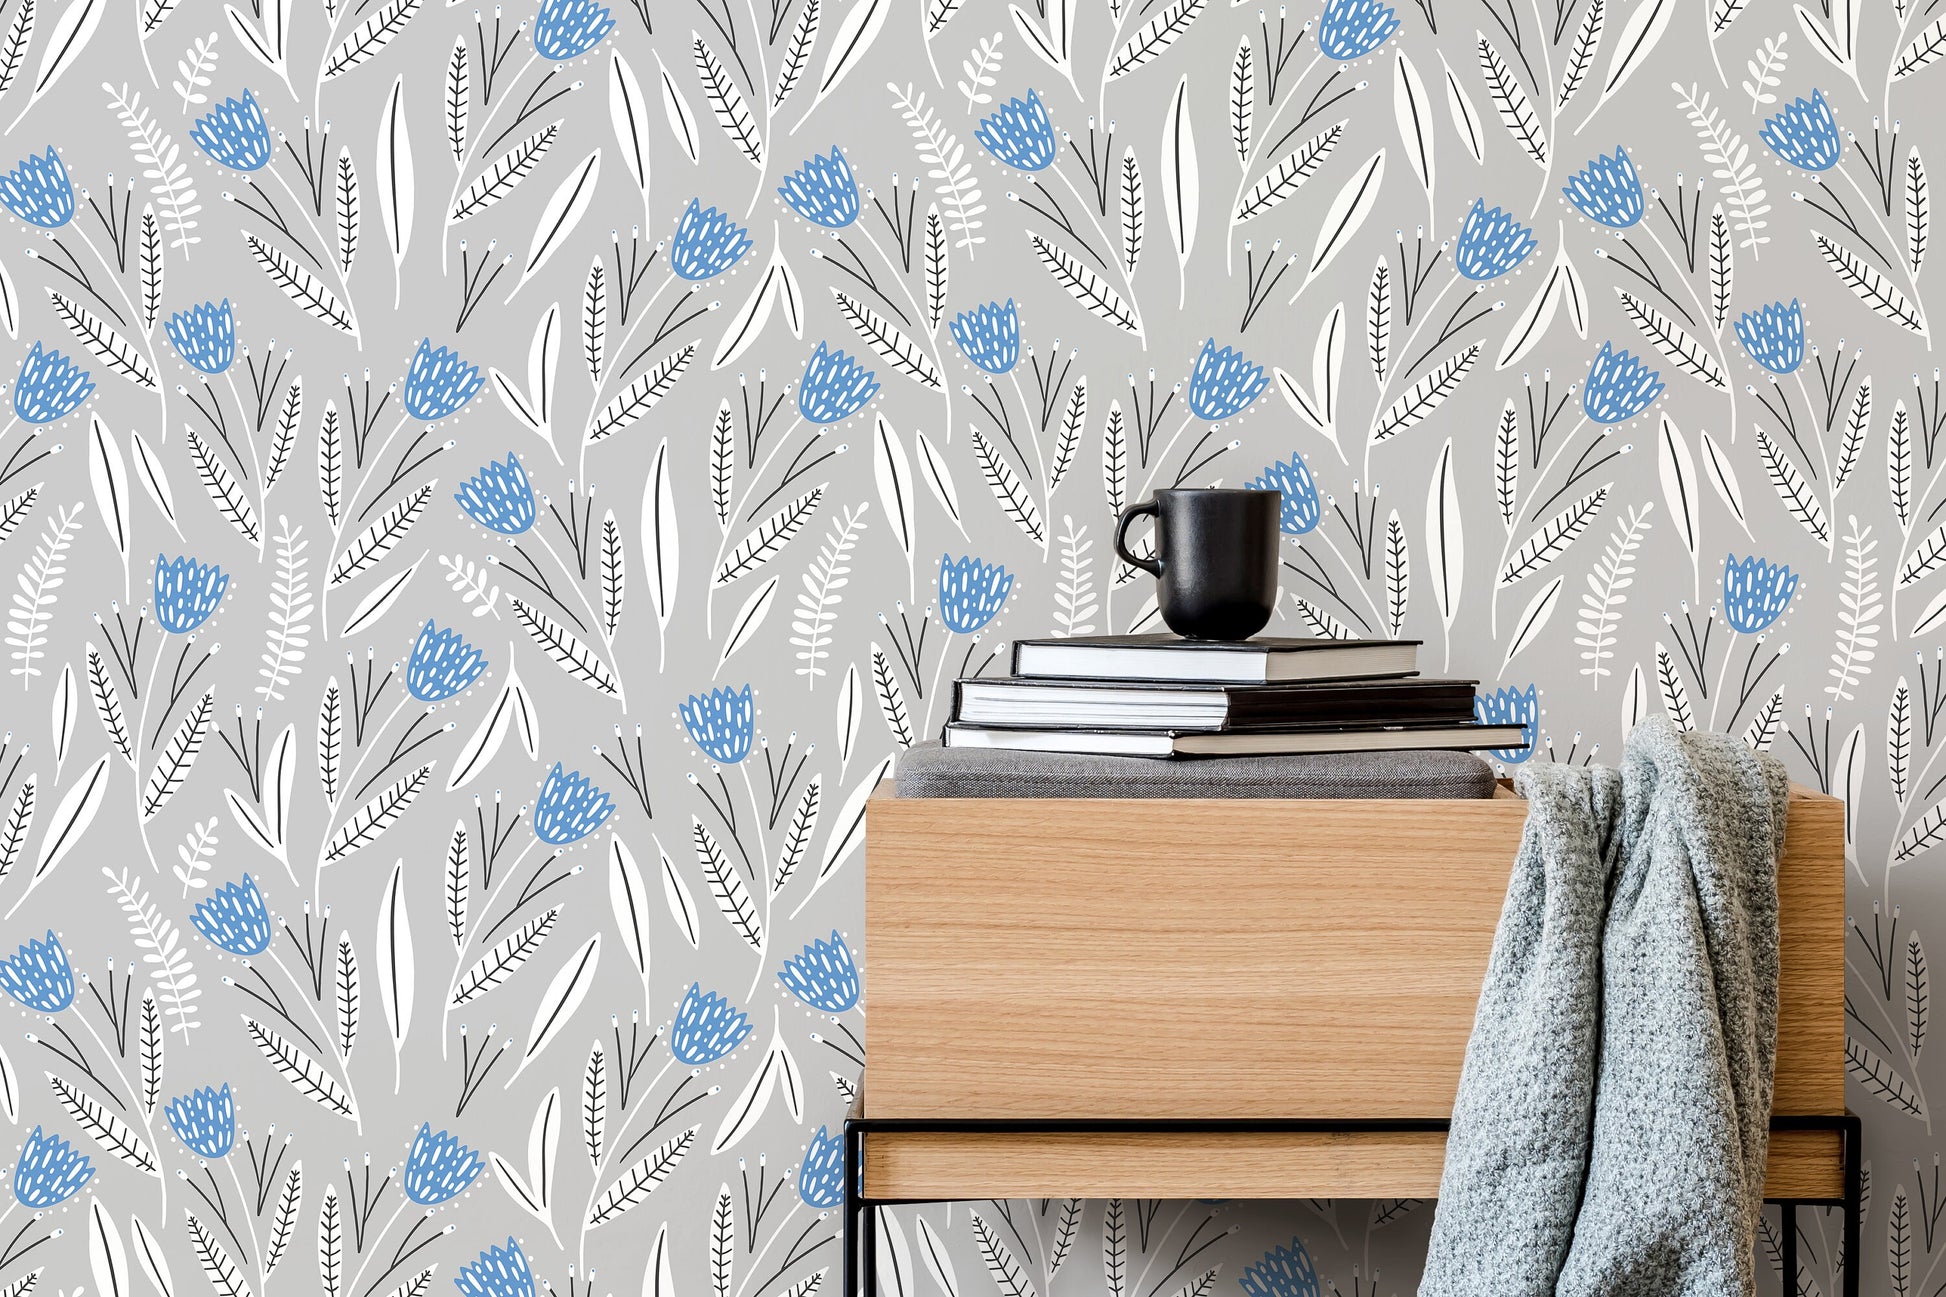 Blue and Gray Floral Wallpaper / Peel and Stick Wallpaper Removable Wallpaper Home Decor Wall Art Wall Decor Room Decor - D388